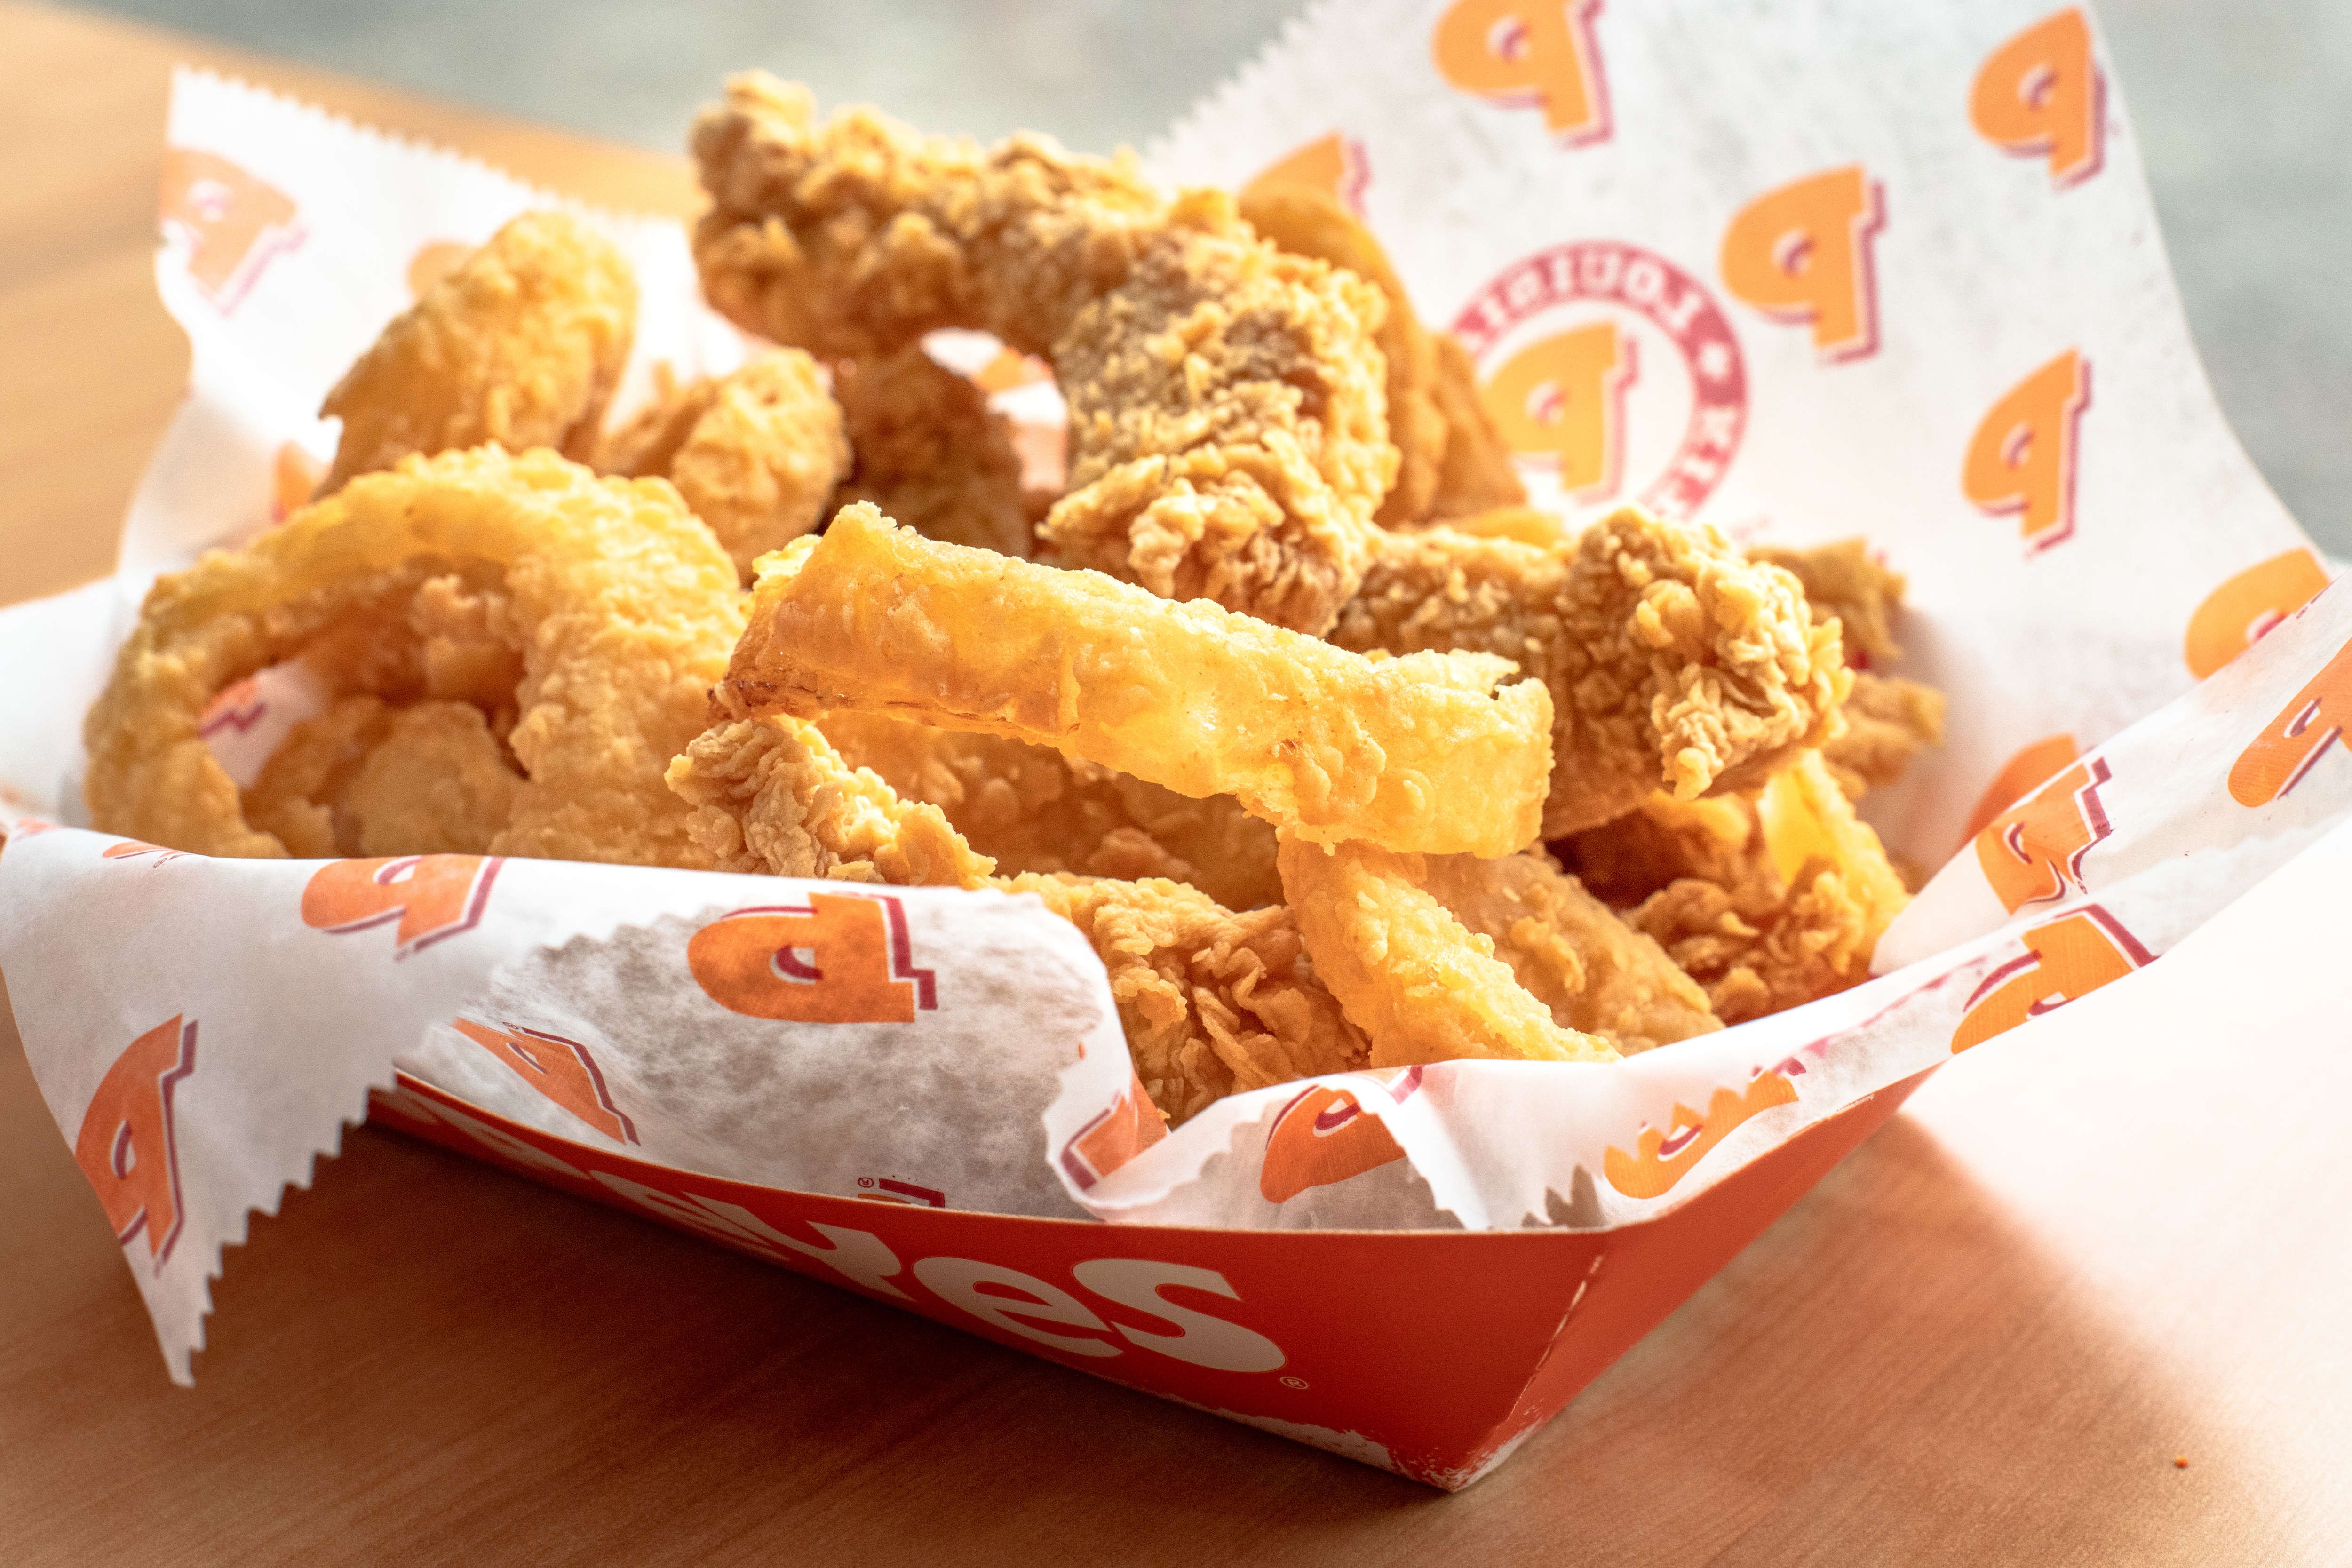 The 10 Healthiest Menu Items at Popeyes, Per Nutritionists